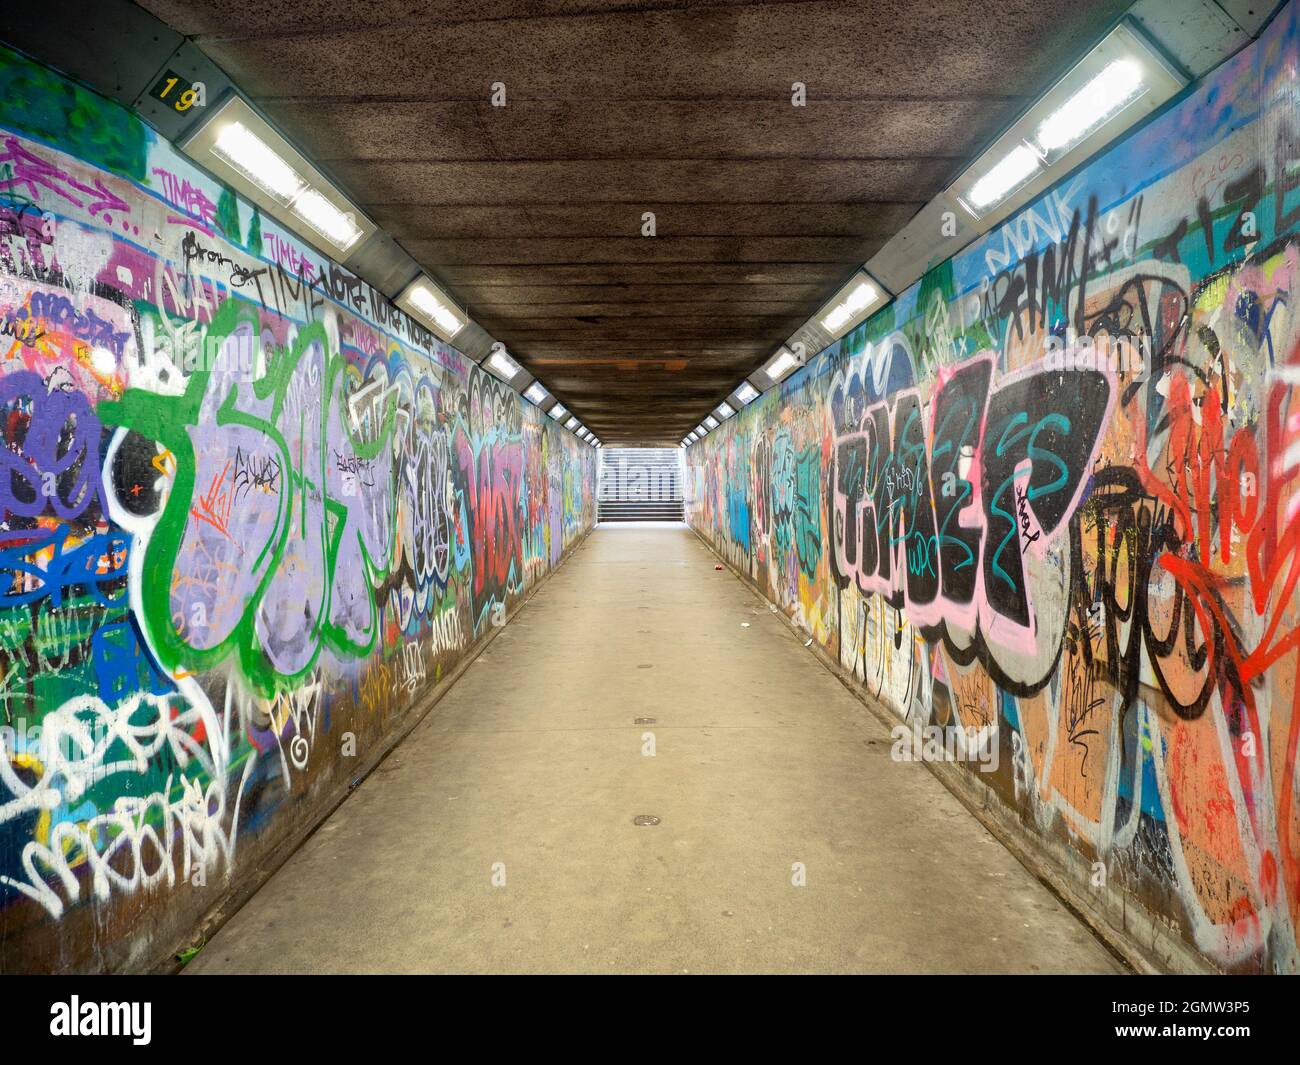 Subways in many cities are places that are dark and dangerous. But here we see one in Belfast that has been transformed by vivid, colourful graffiti i Stock Photo